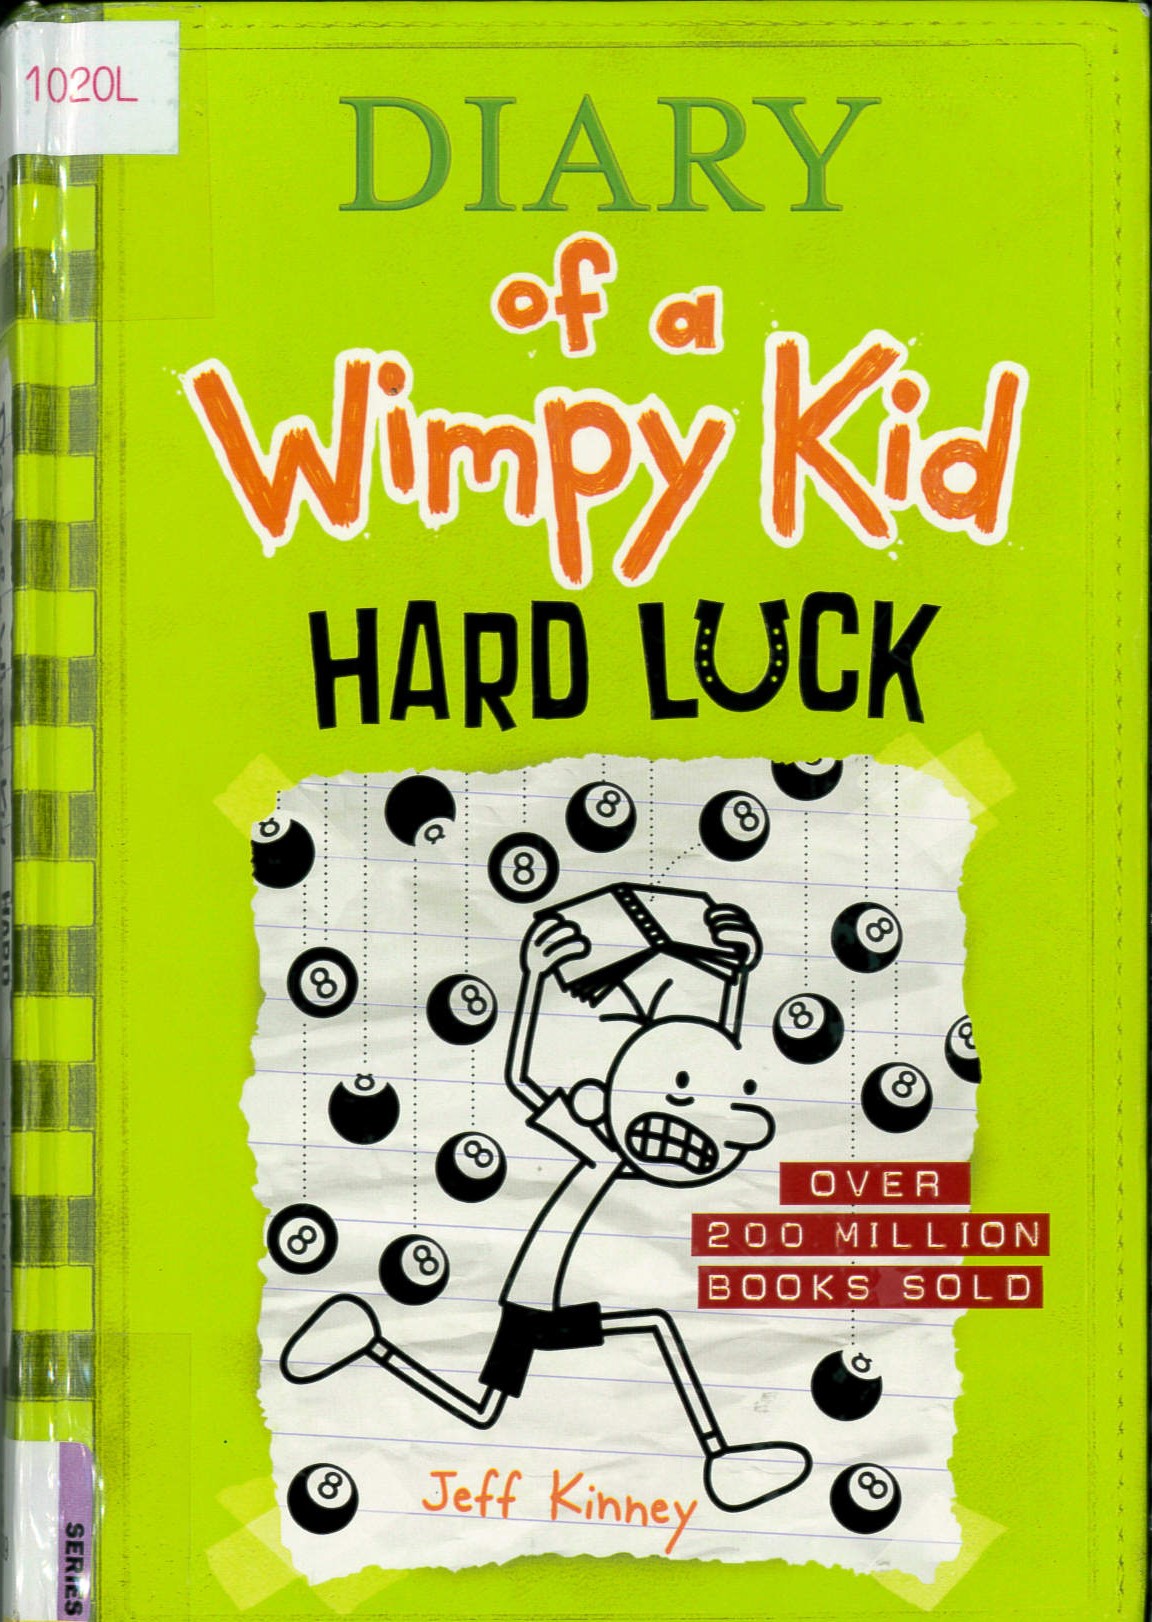 Diary of a wimpy kid(8) : hard luck /